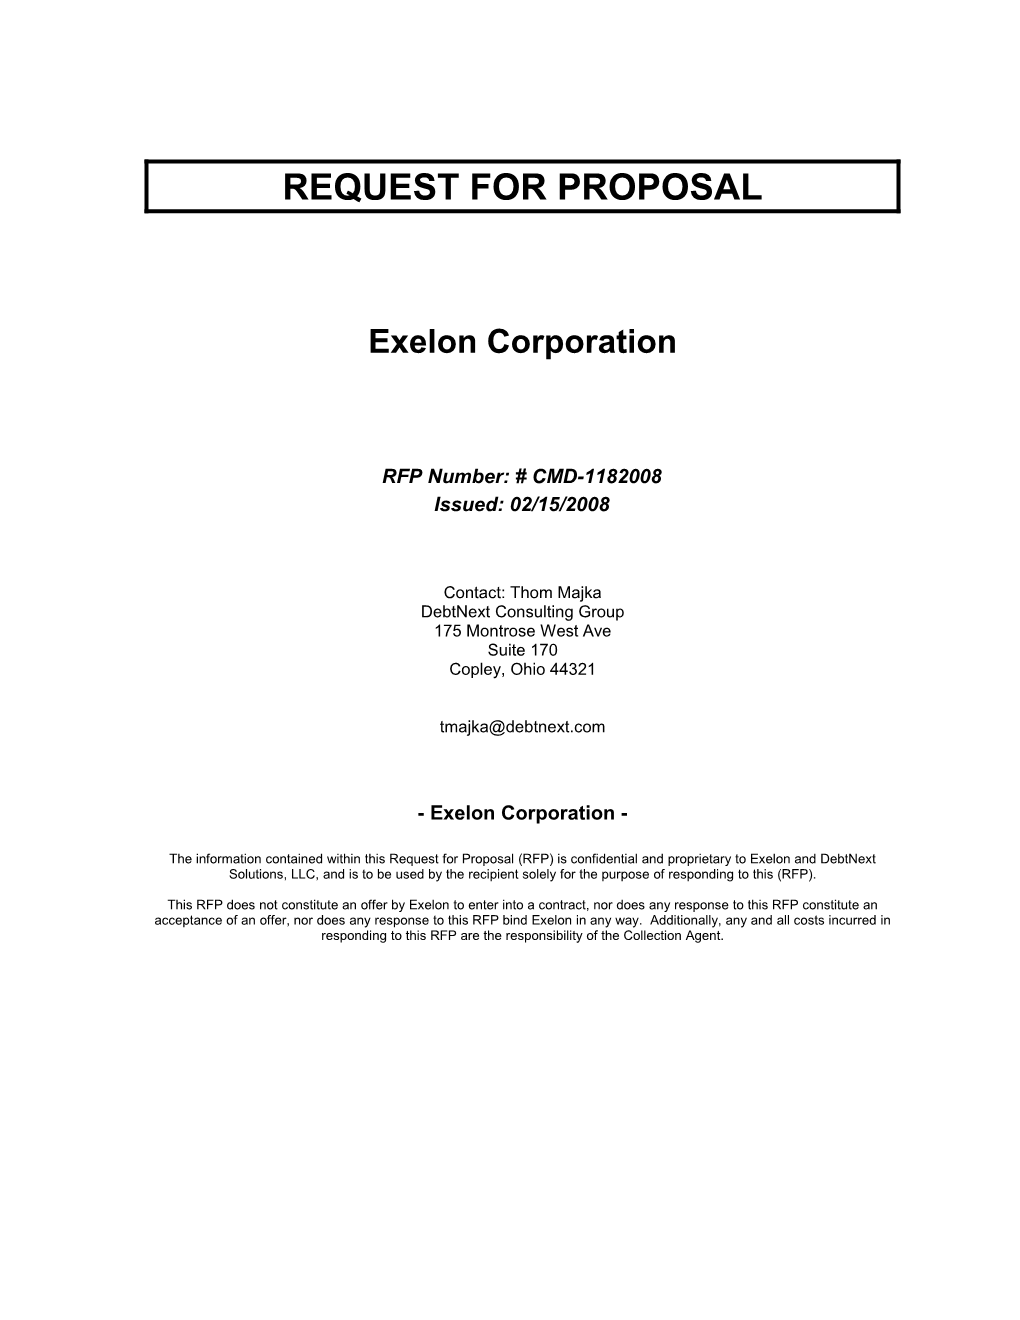 Request for Proposal s32